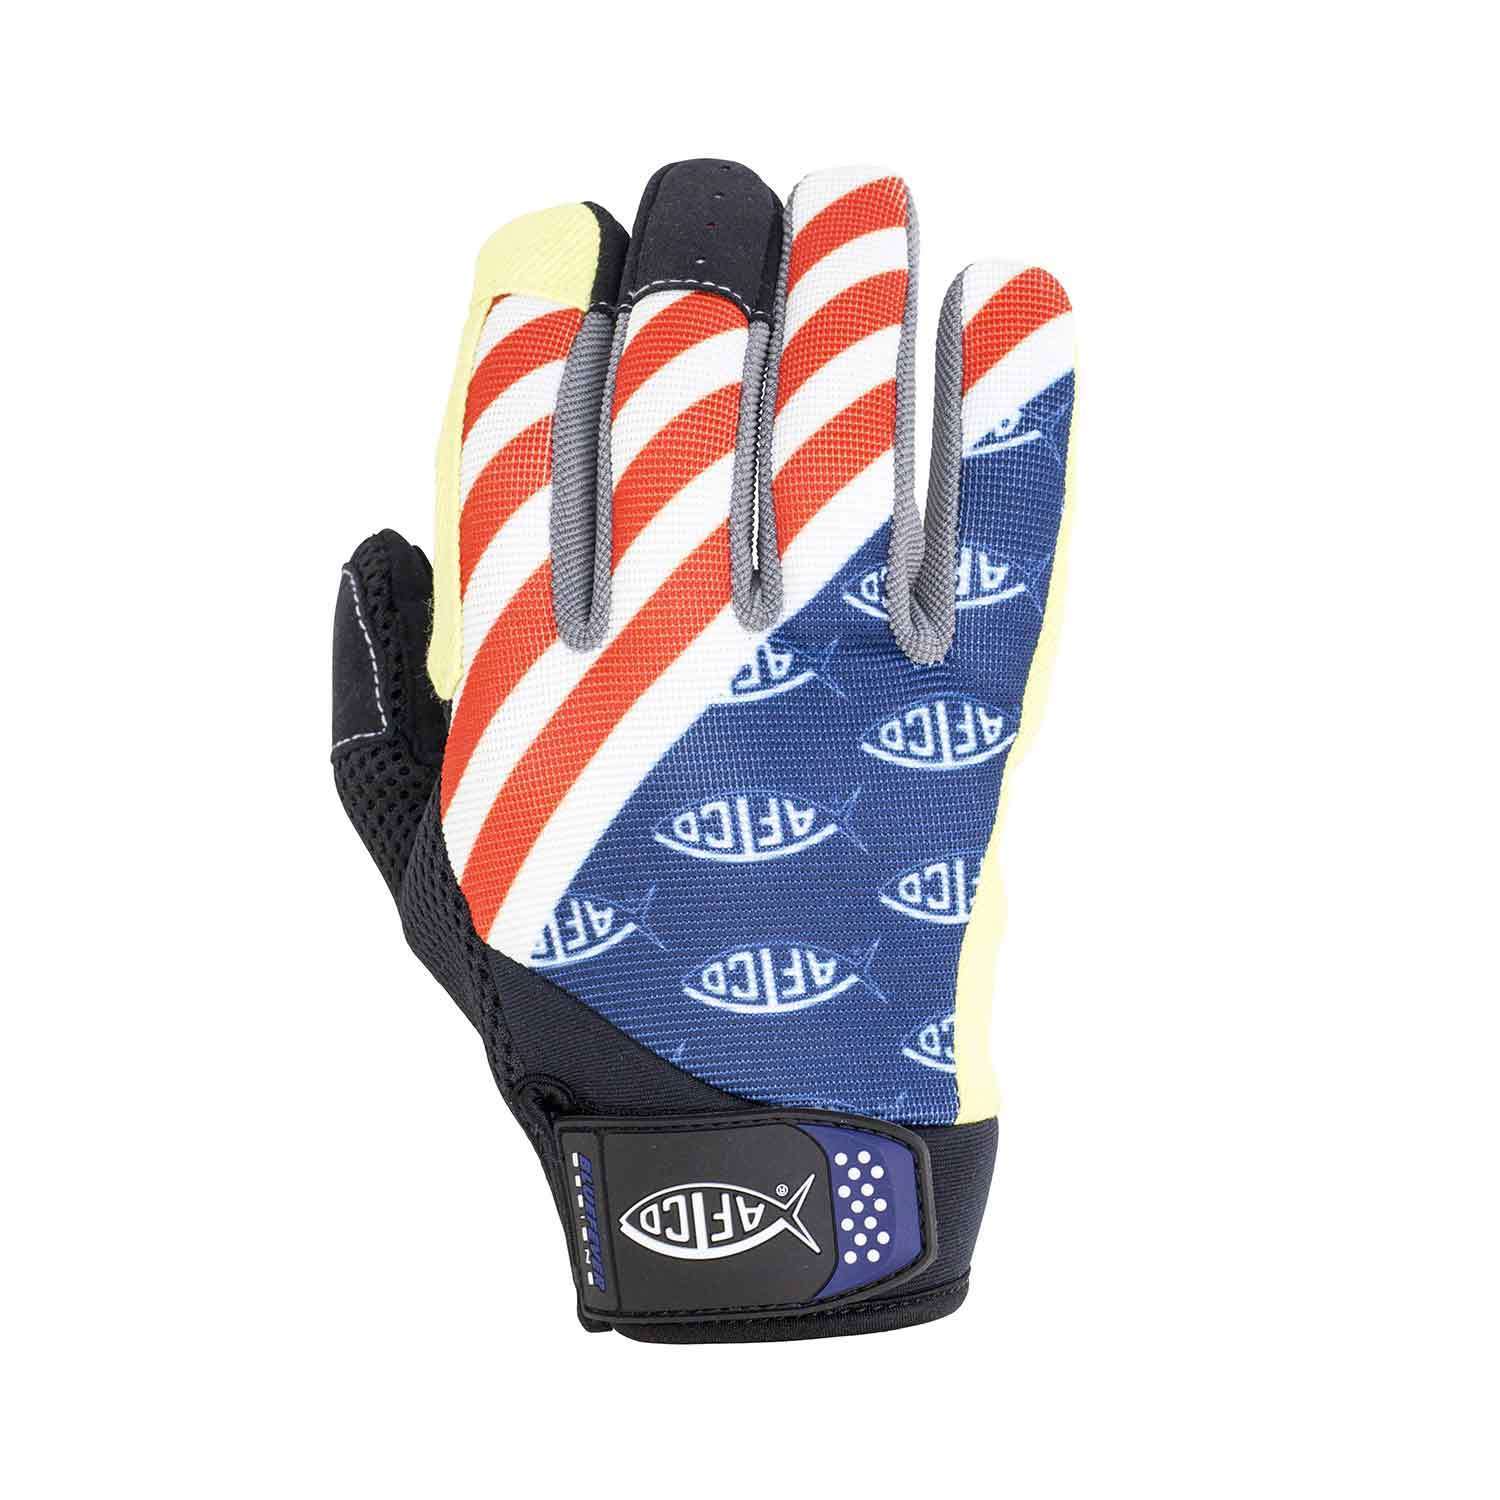 AFTCO Patriot Release Fishing Glove